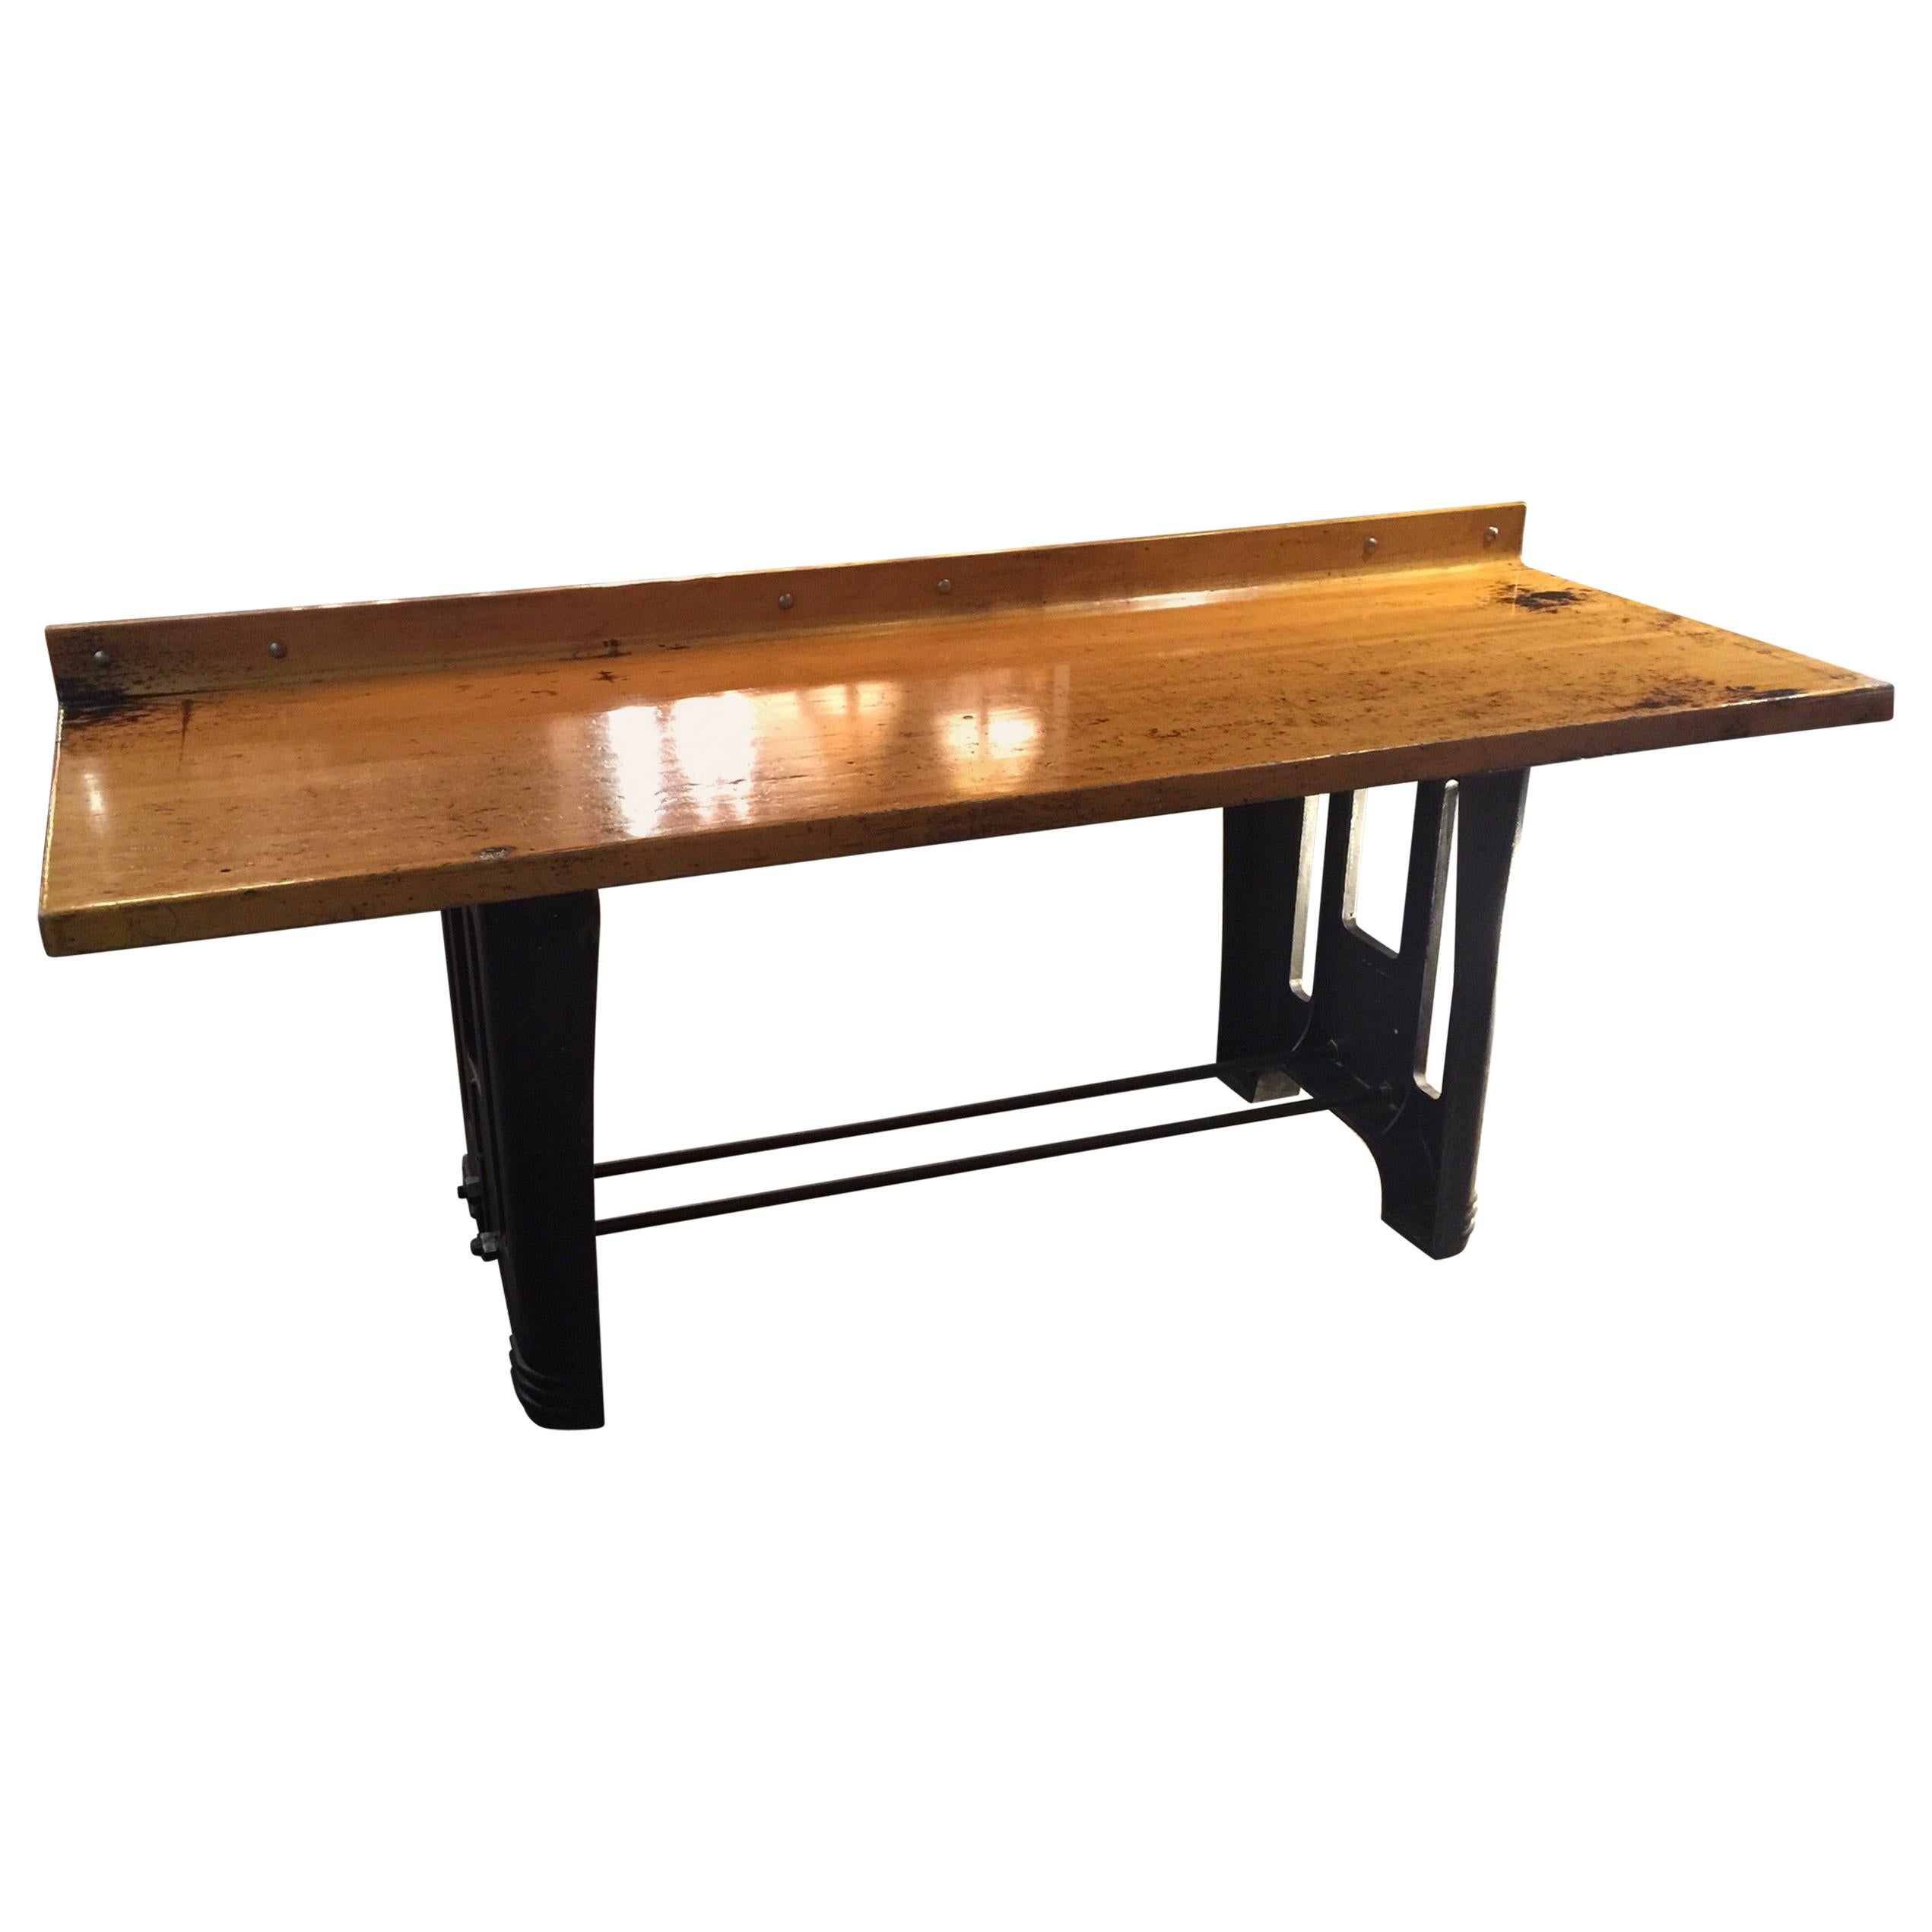 Maple Table with Refinished Vintage Steel Base Industrial Style, circa Mid-1900s